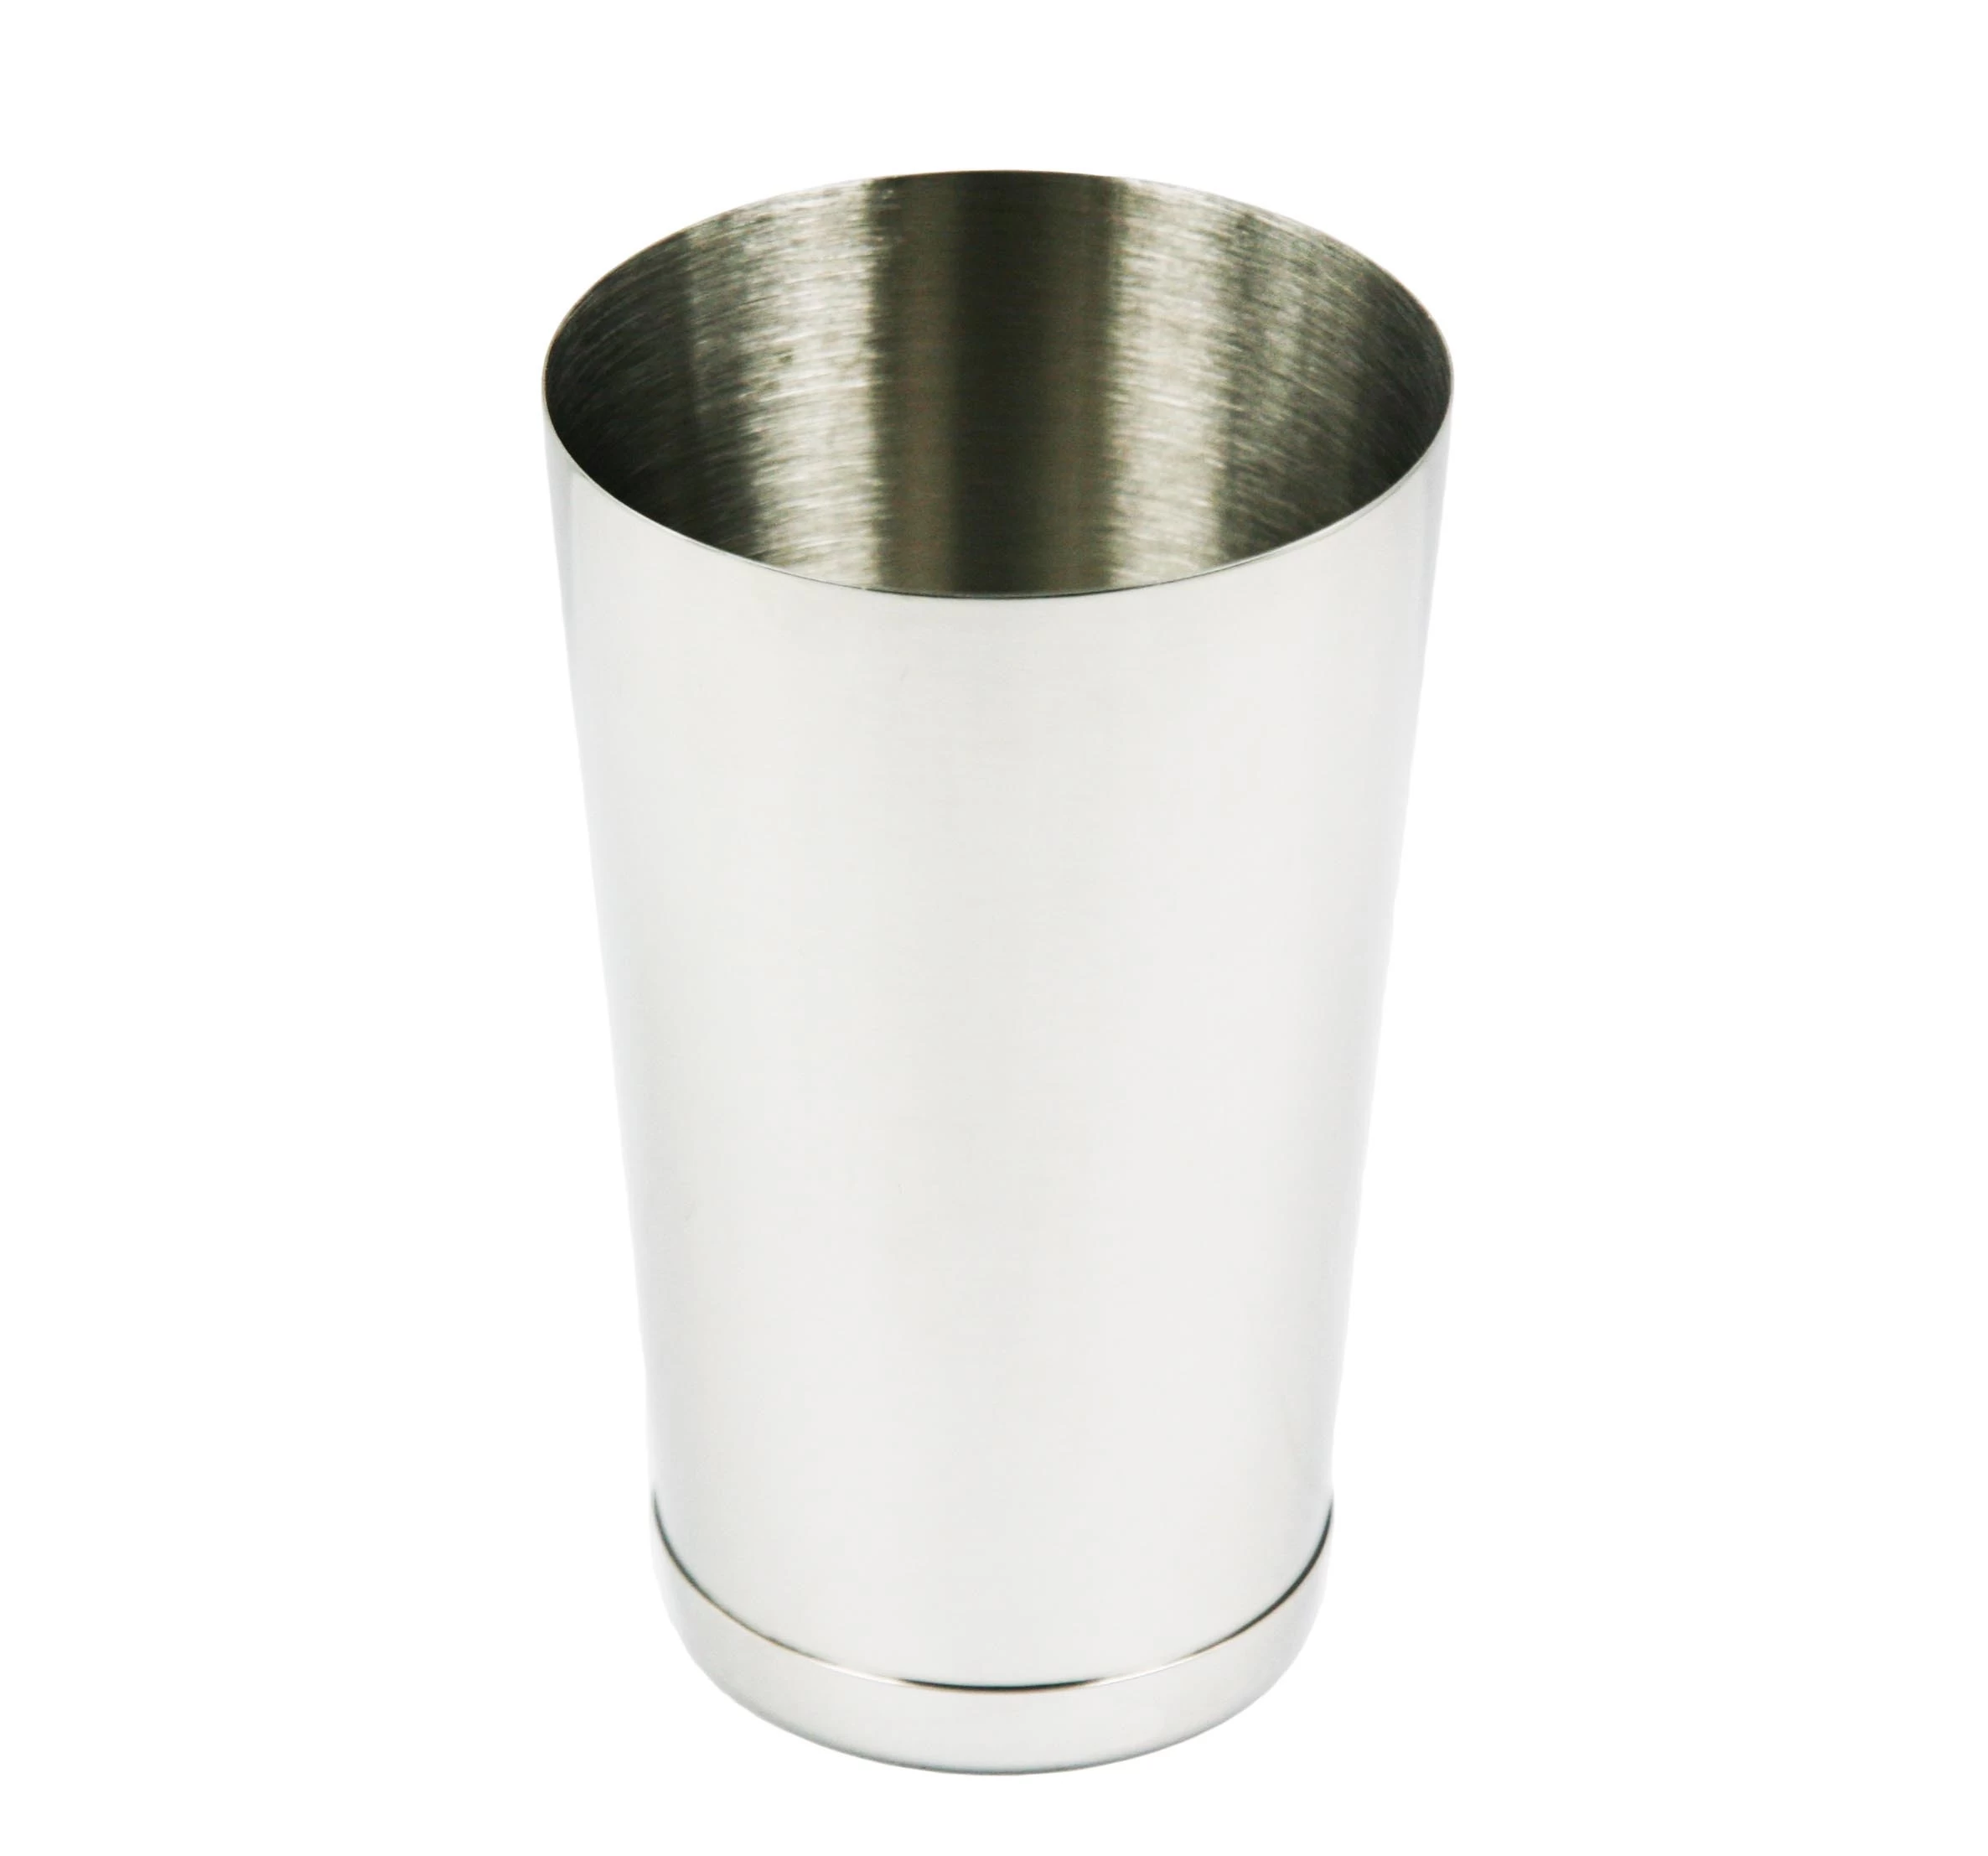 Stainless steel Boston Cup Cocktail Shaker EB-B65